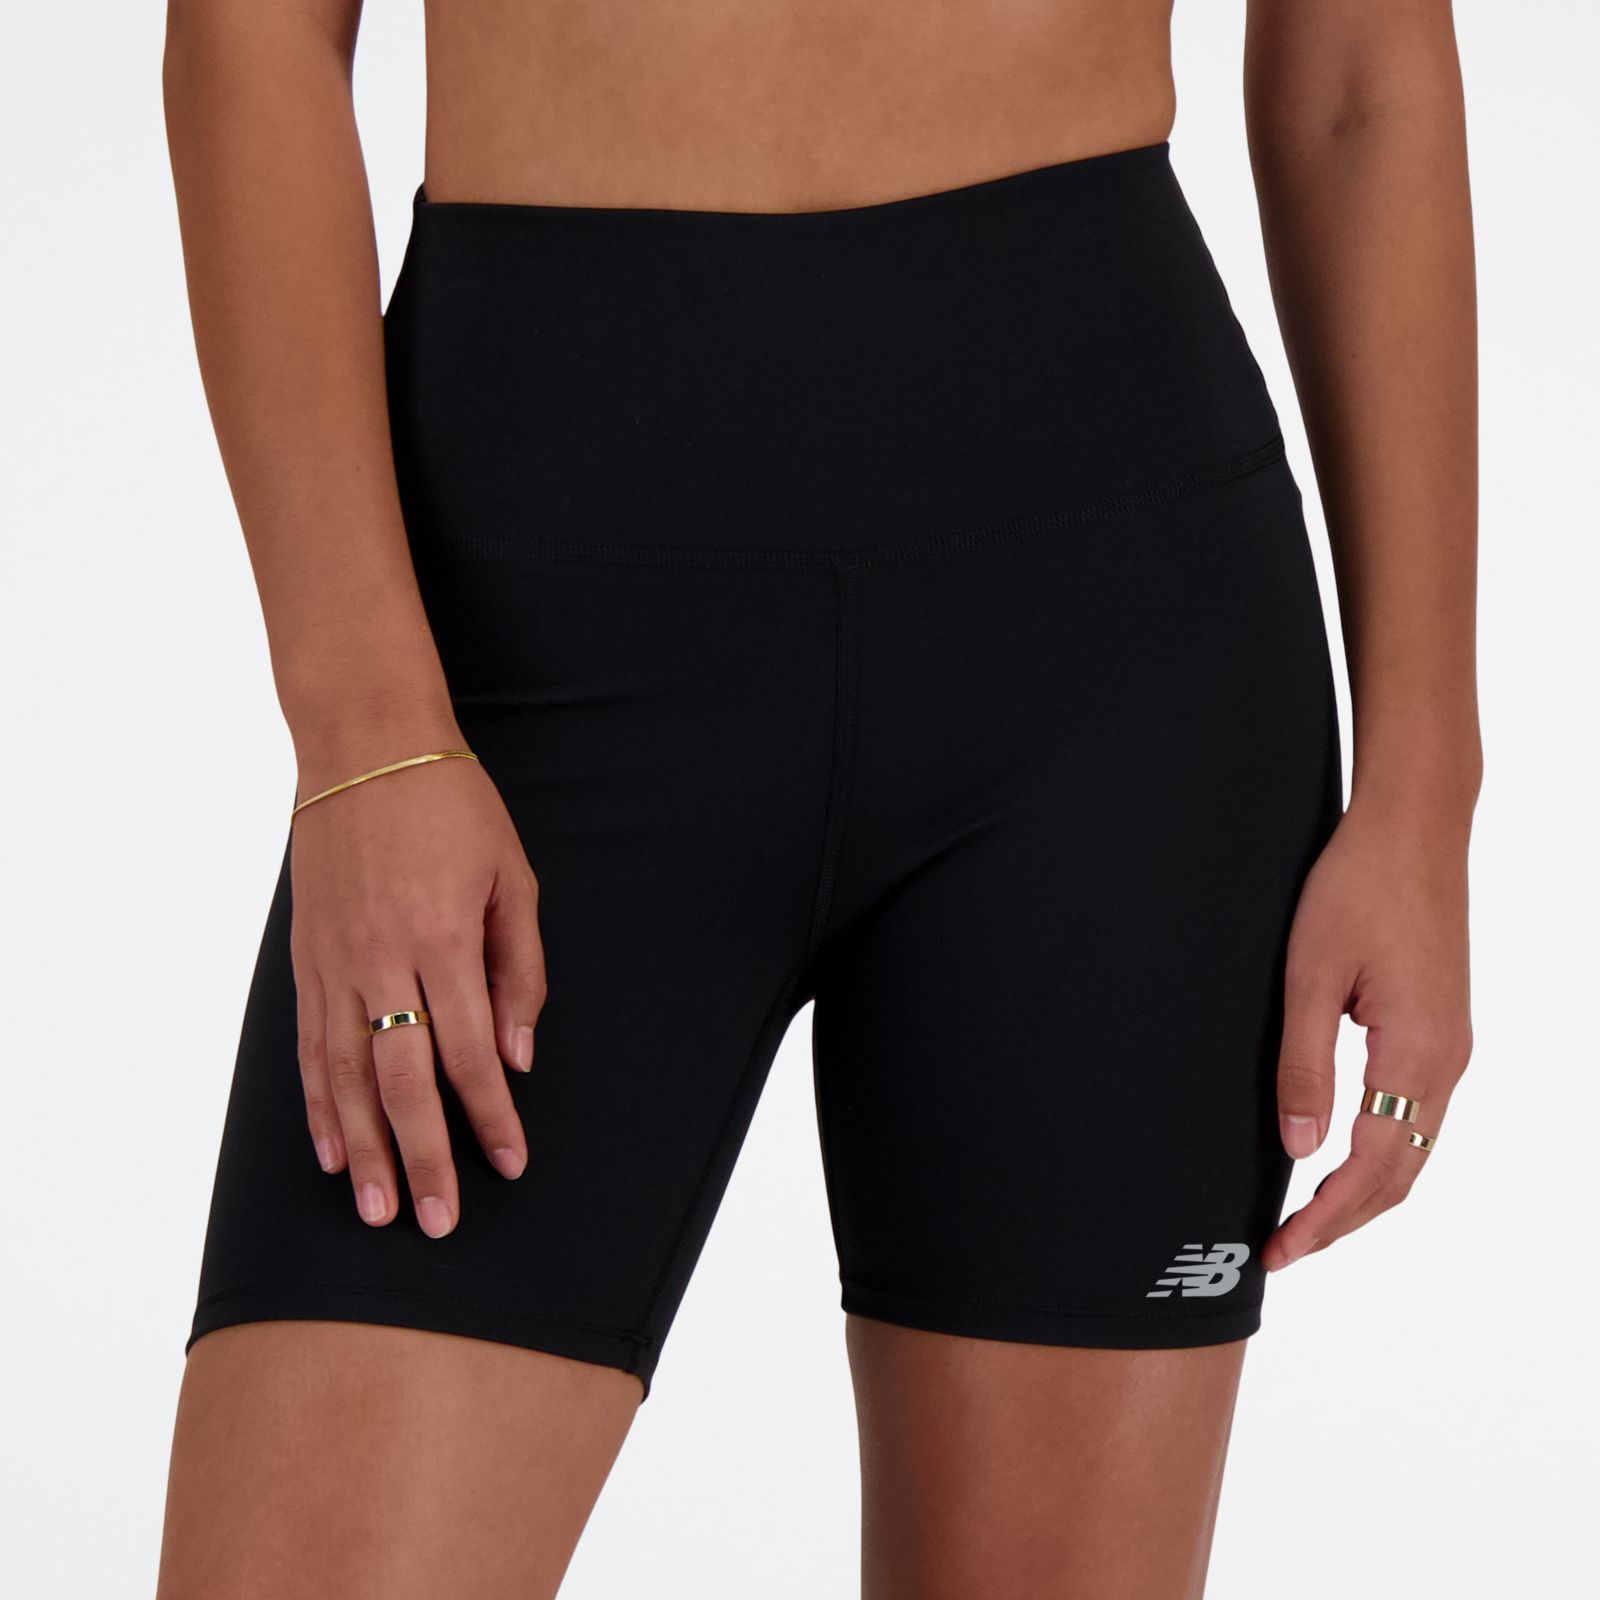 Spandex Shorts for sale in Tampa, Florida